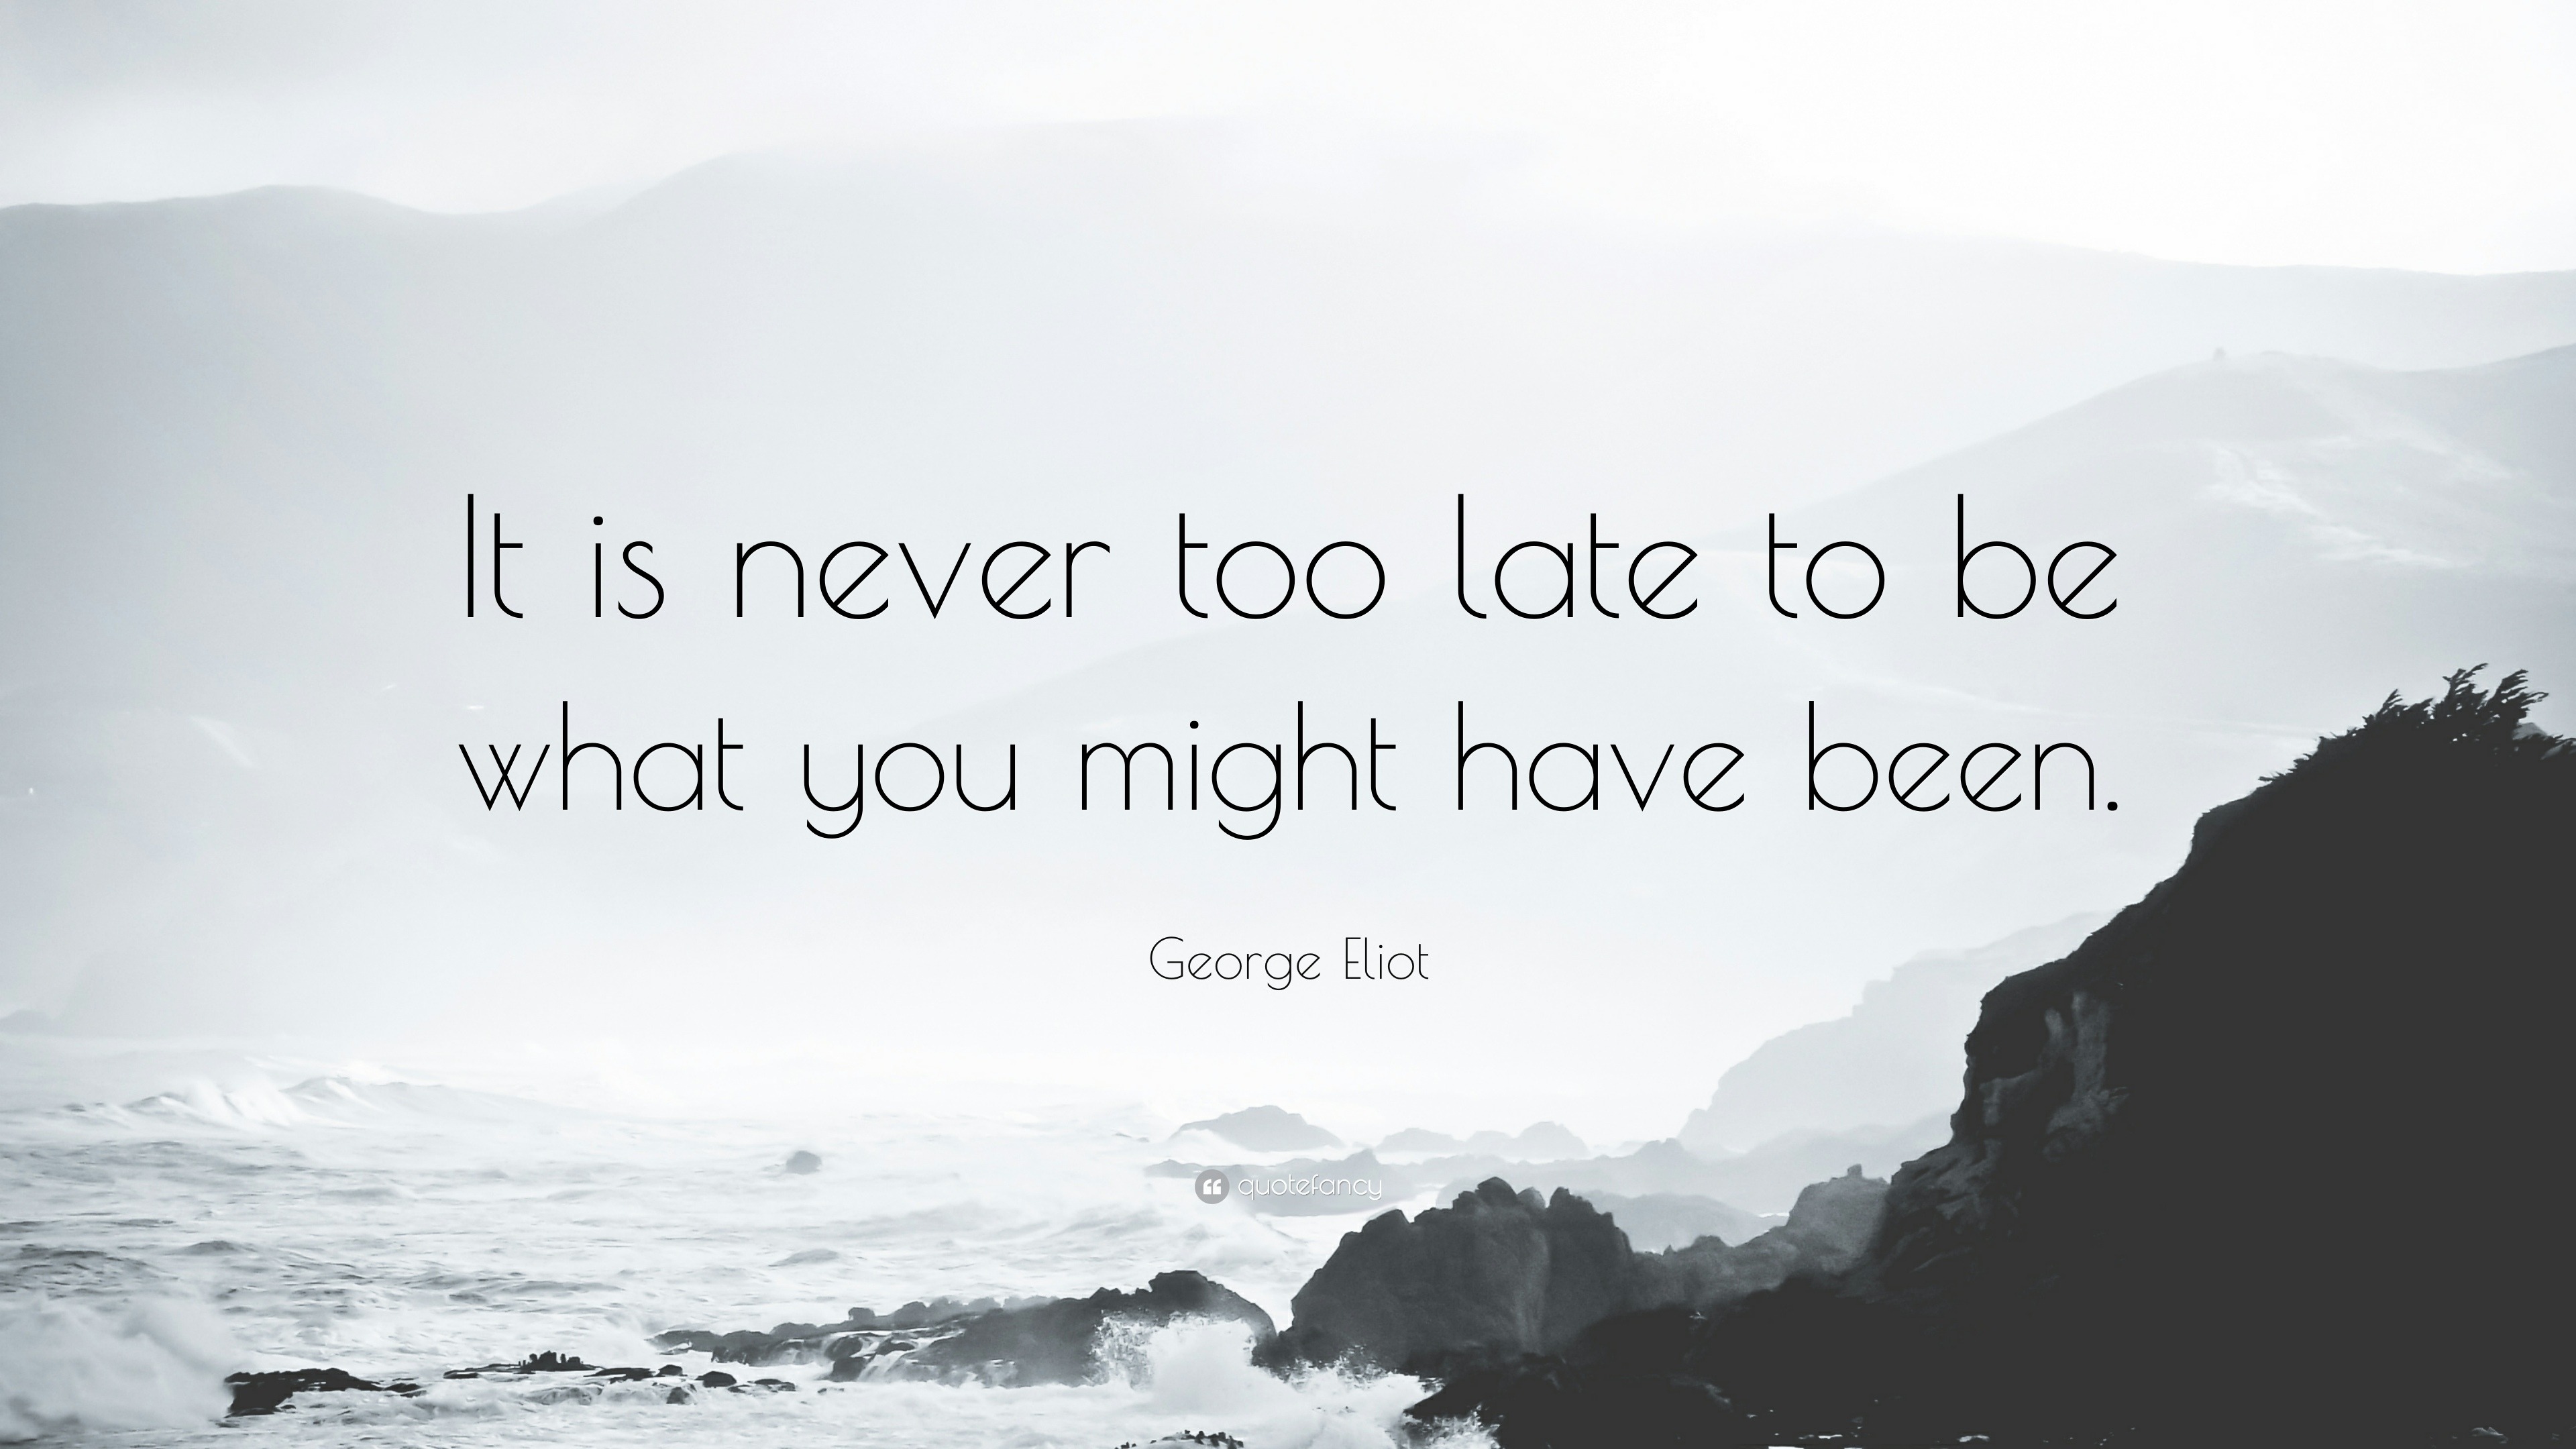 George Eliot Quote: “It is never too late to be what you might have been.”